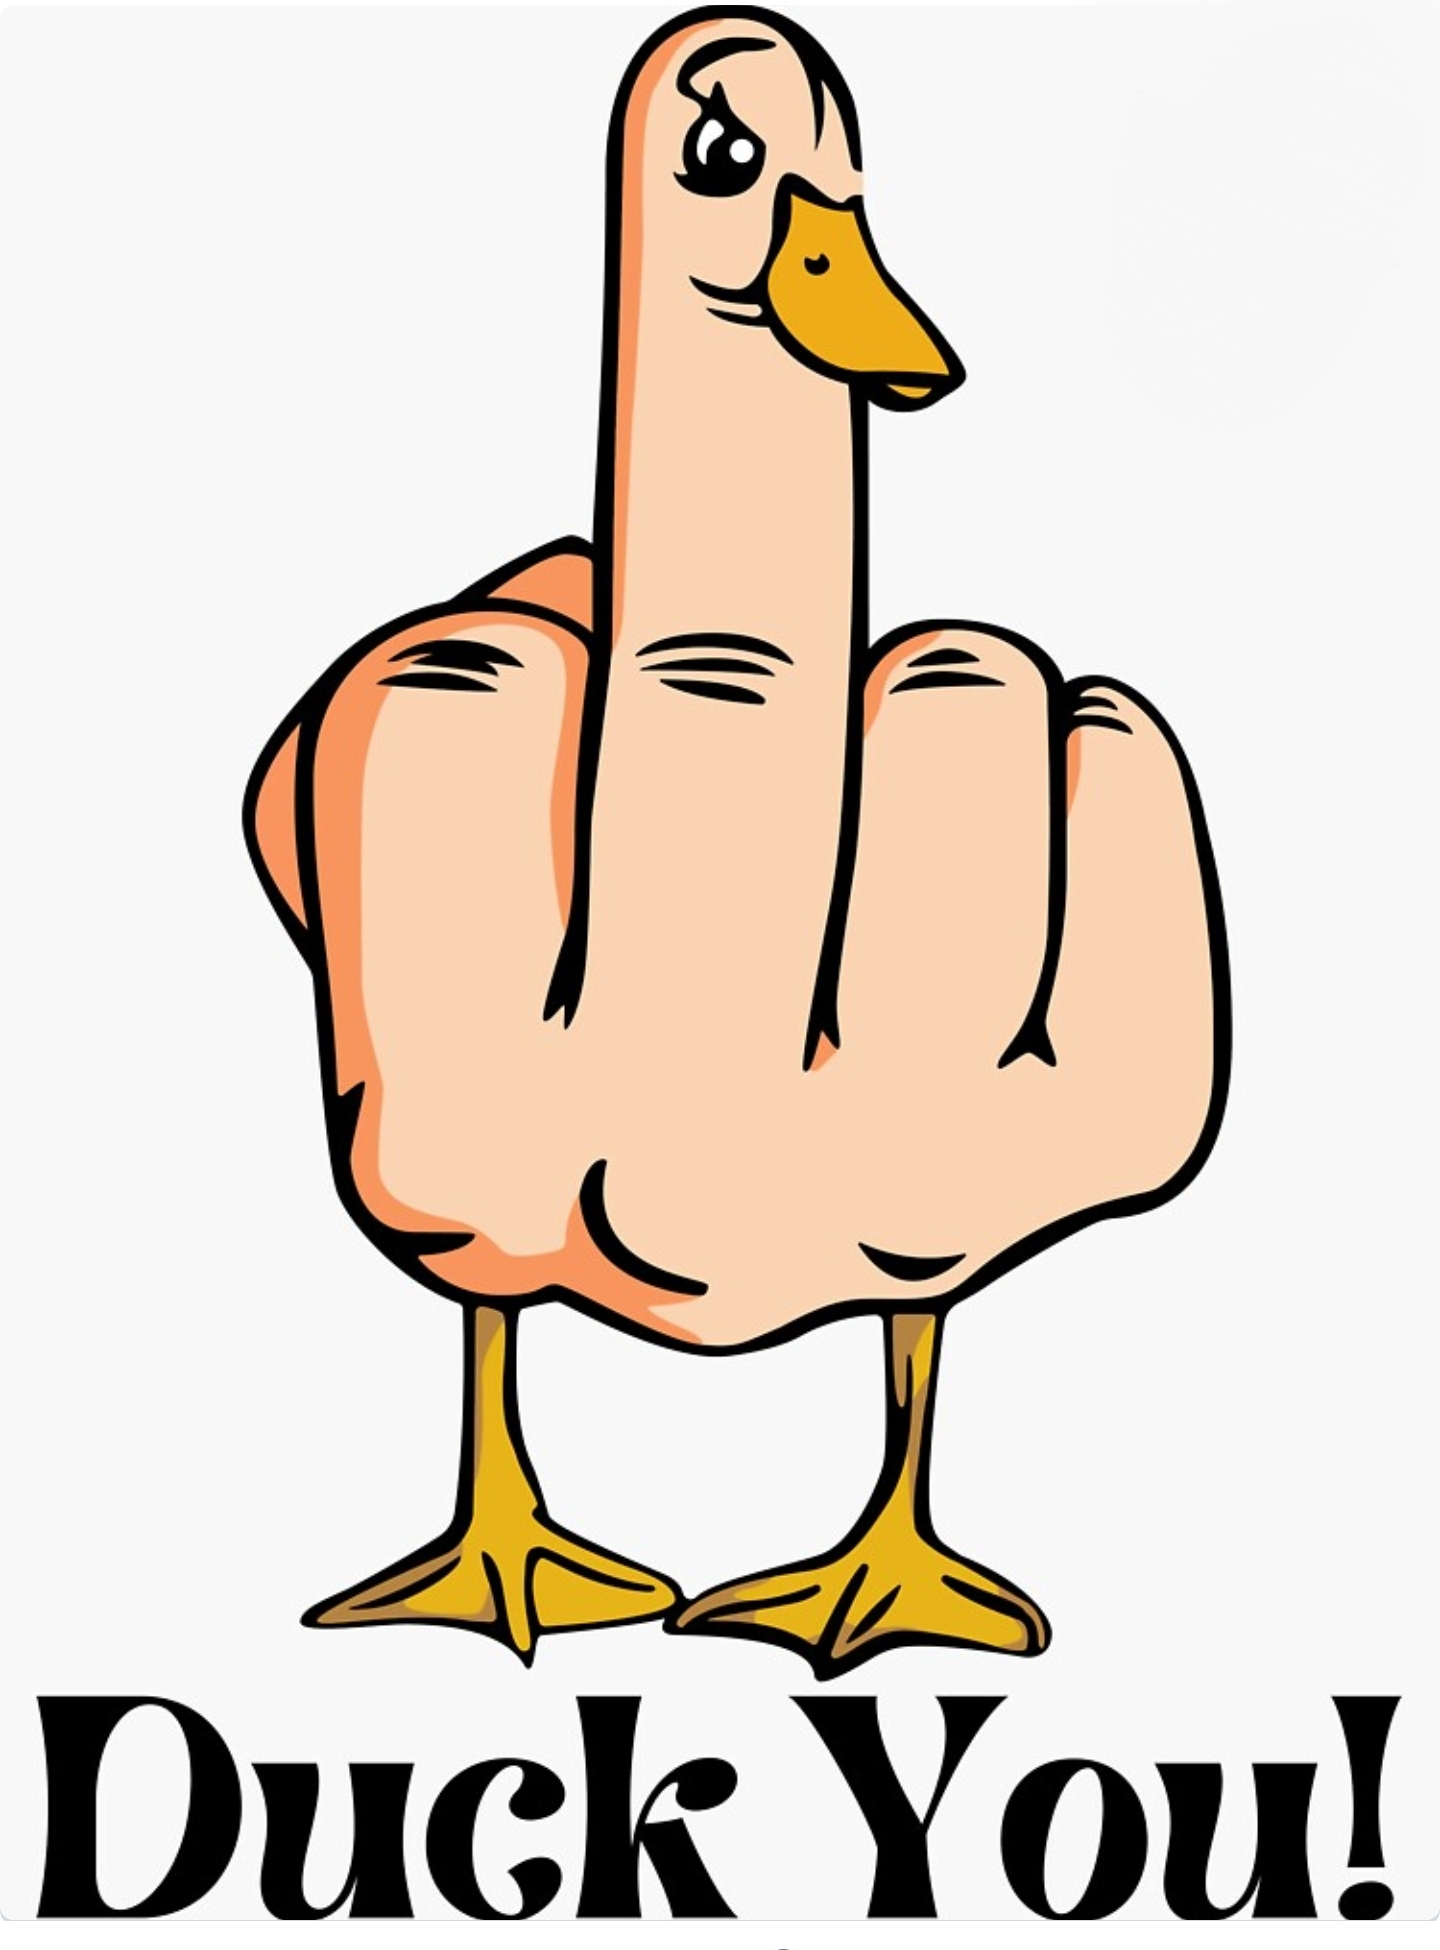 caption: "Duck You" image: drawing of hand with middle finger pointed toward viewer with a duck's face added to the extended middle digit and legs to the bottom of the disembodied hand